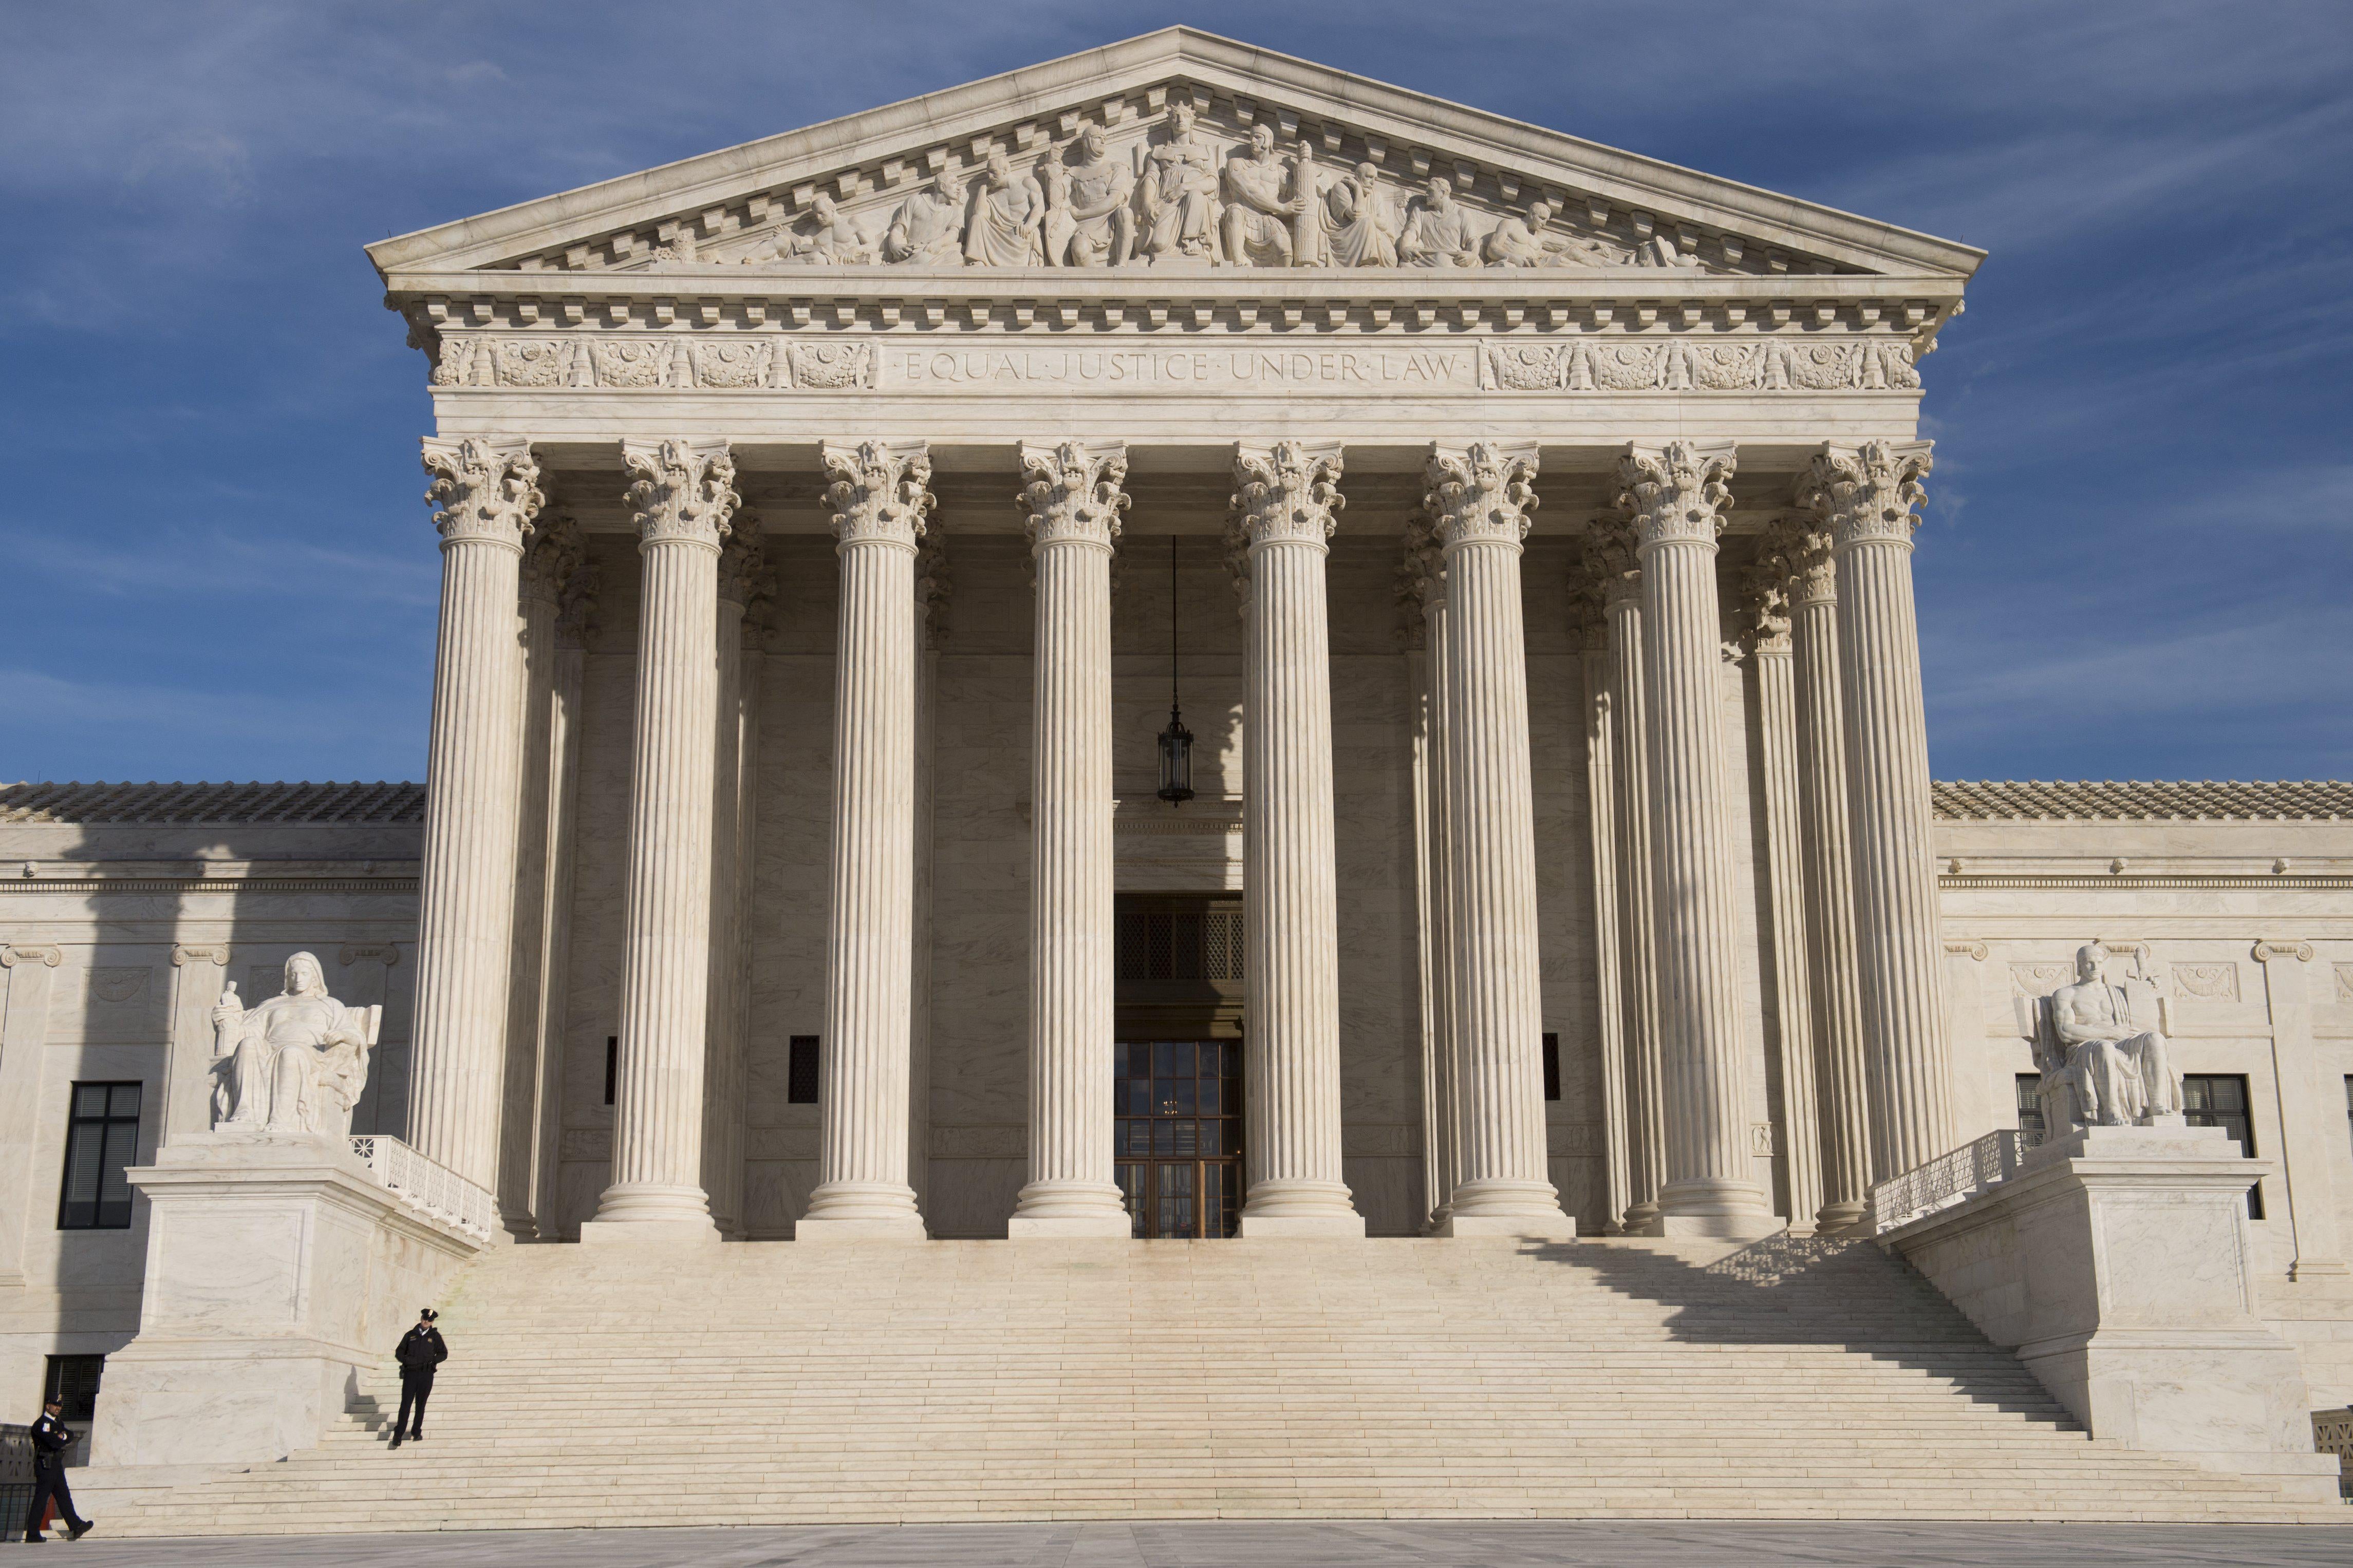 The U.S. Supreme Court as seen in 2017.